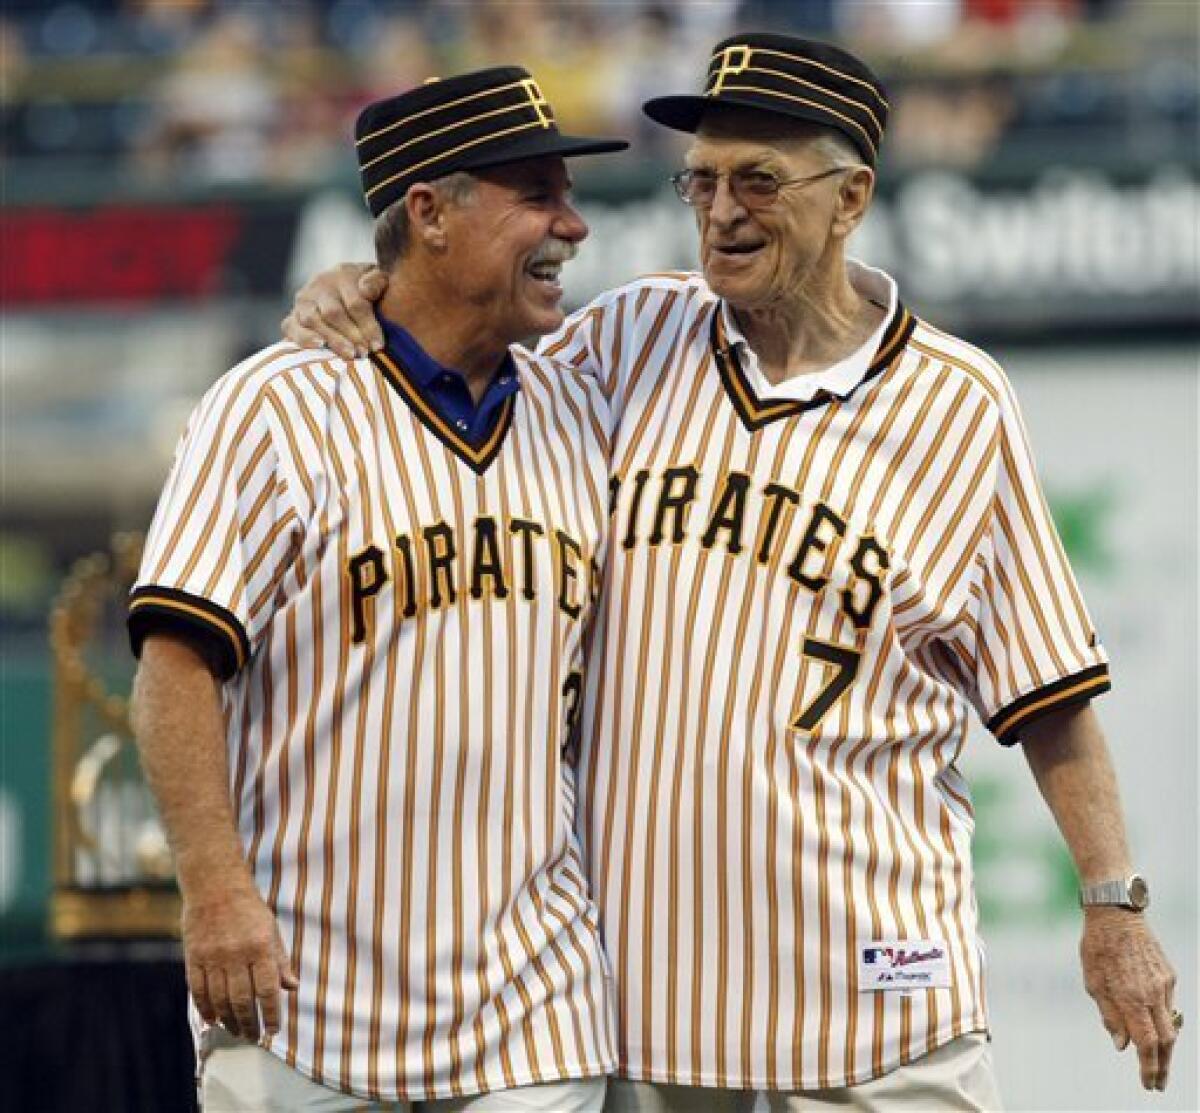 Relief pitcher Kent Tekulve of the Pittsburgh Pirates smiles